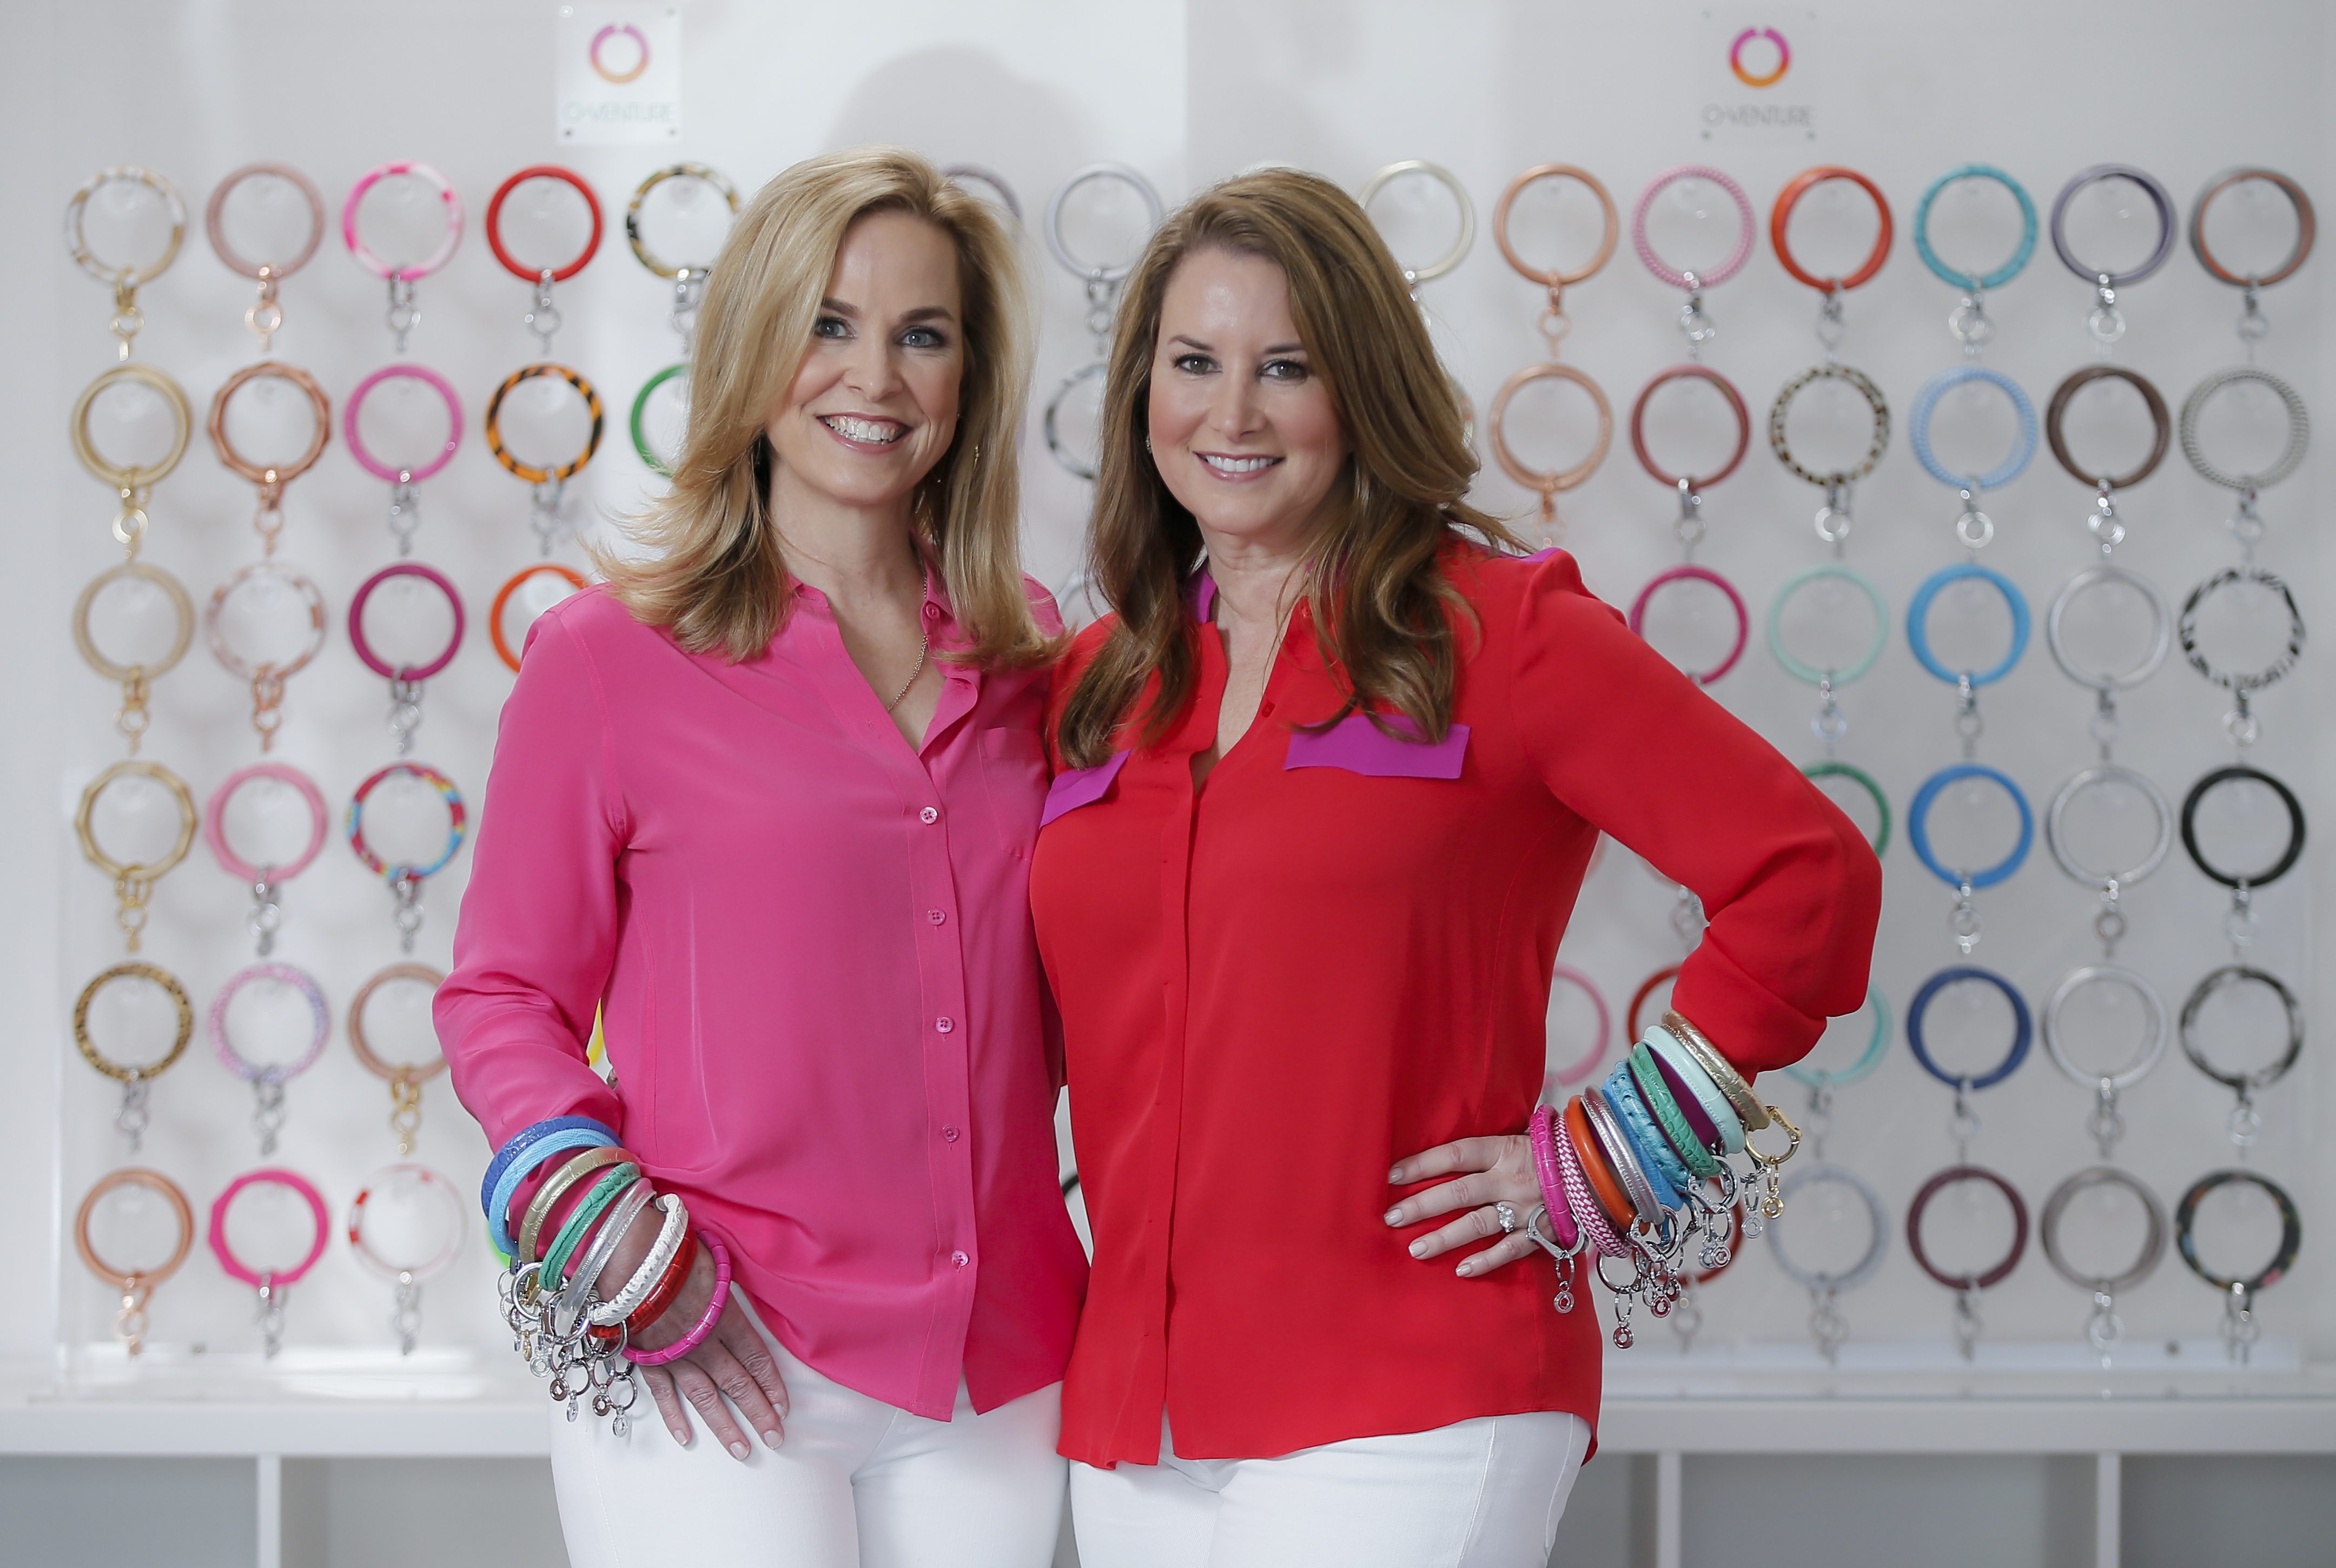 Meet two Dallas women who turned a frustrating morning into a $7.5 million enterprise photo